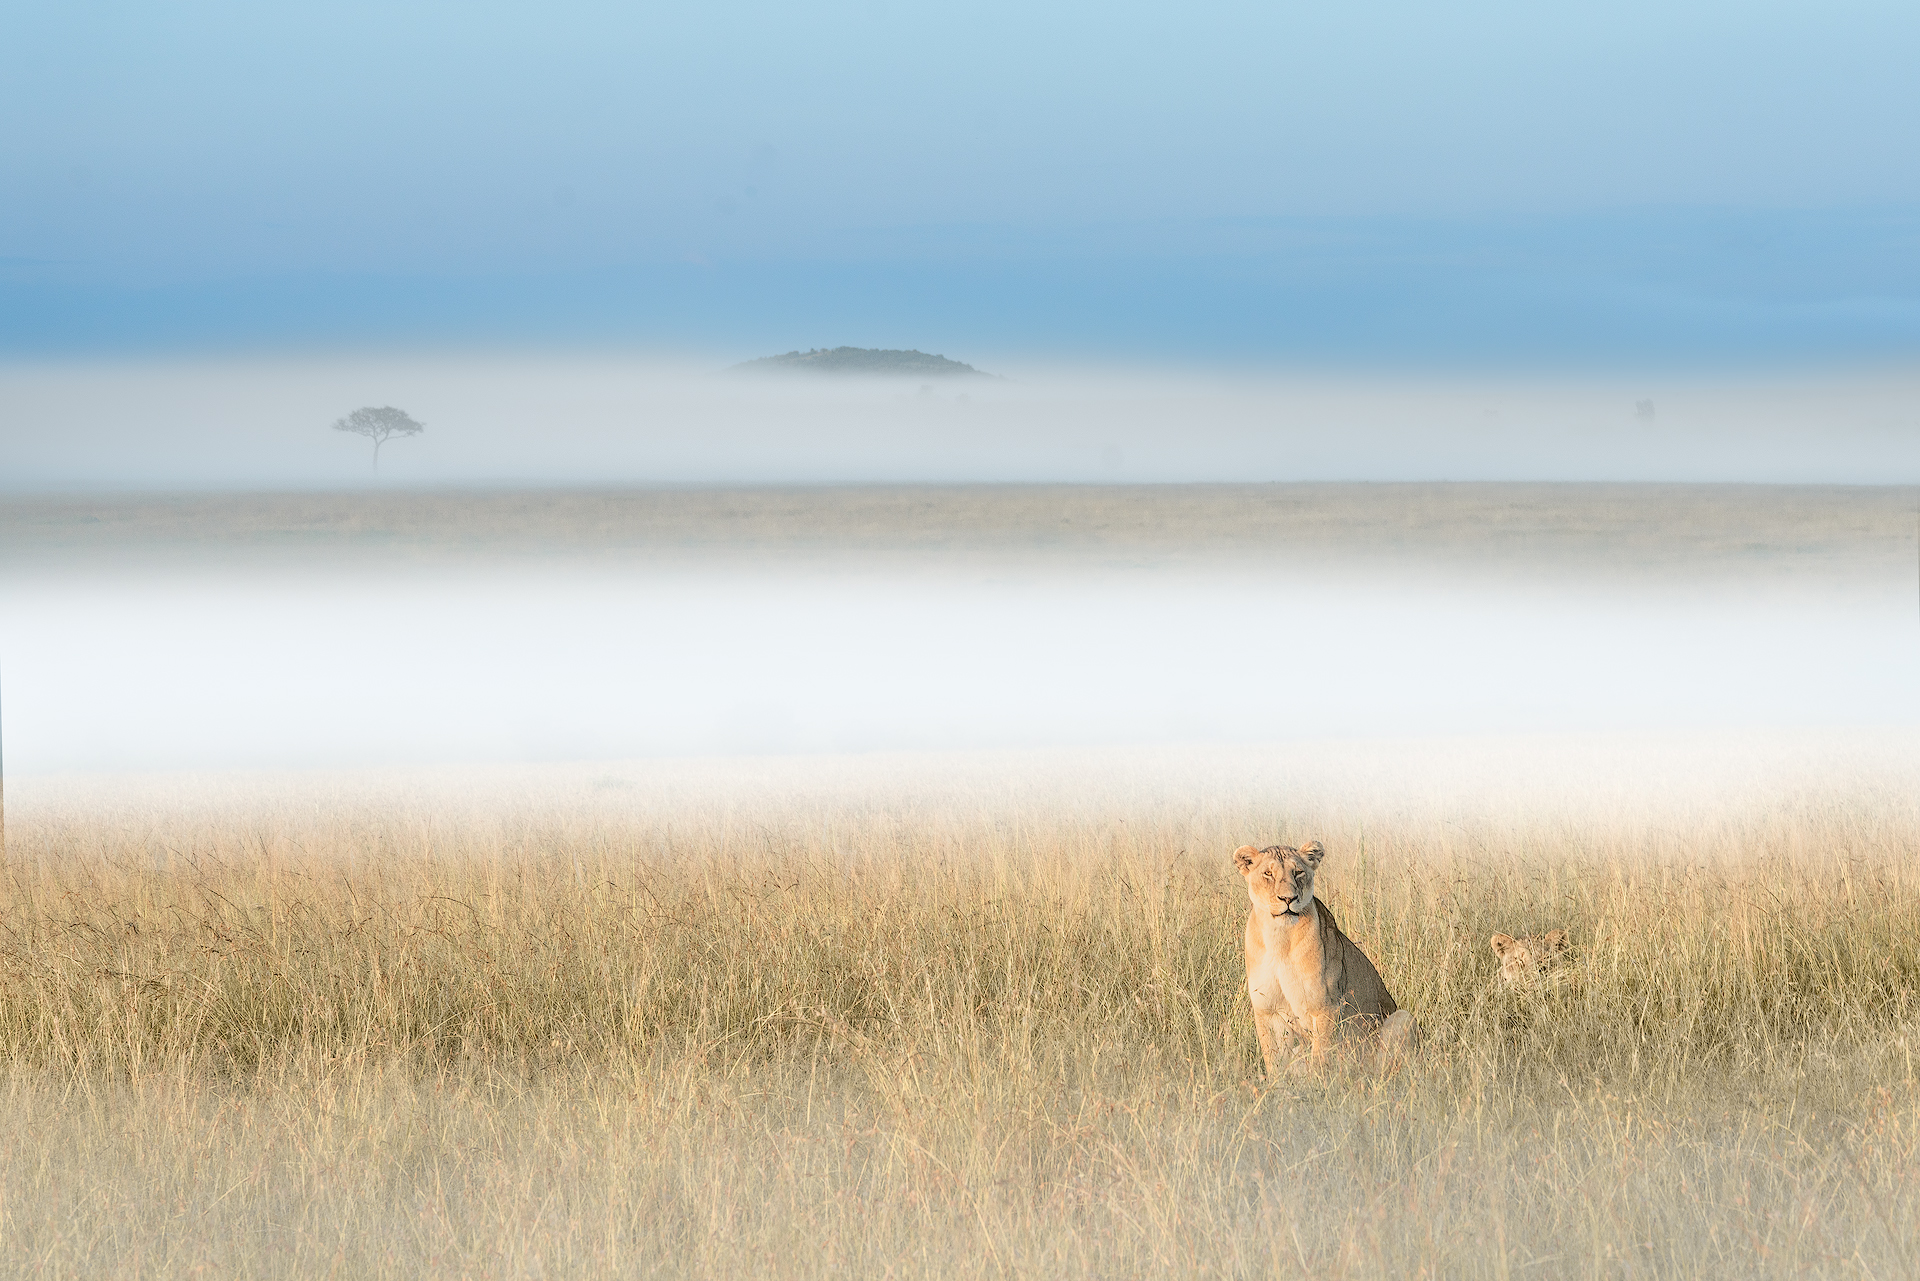 Lioness in the fog...